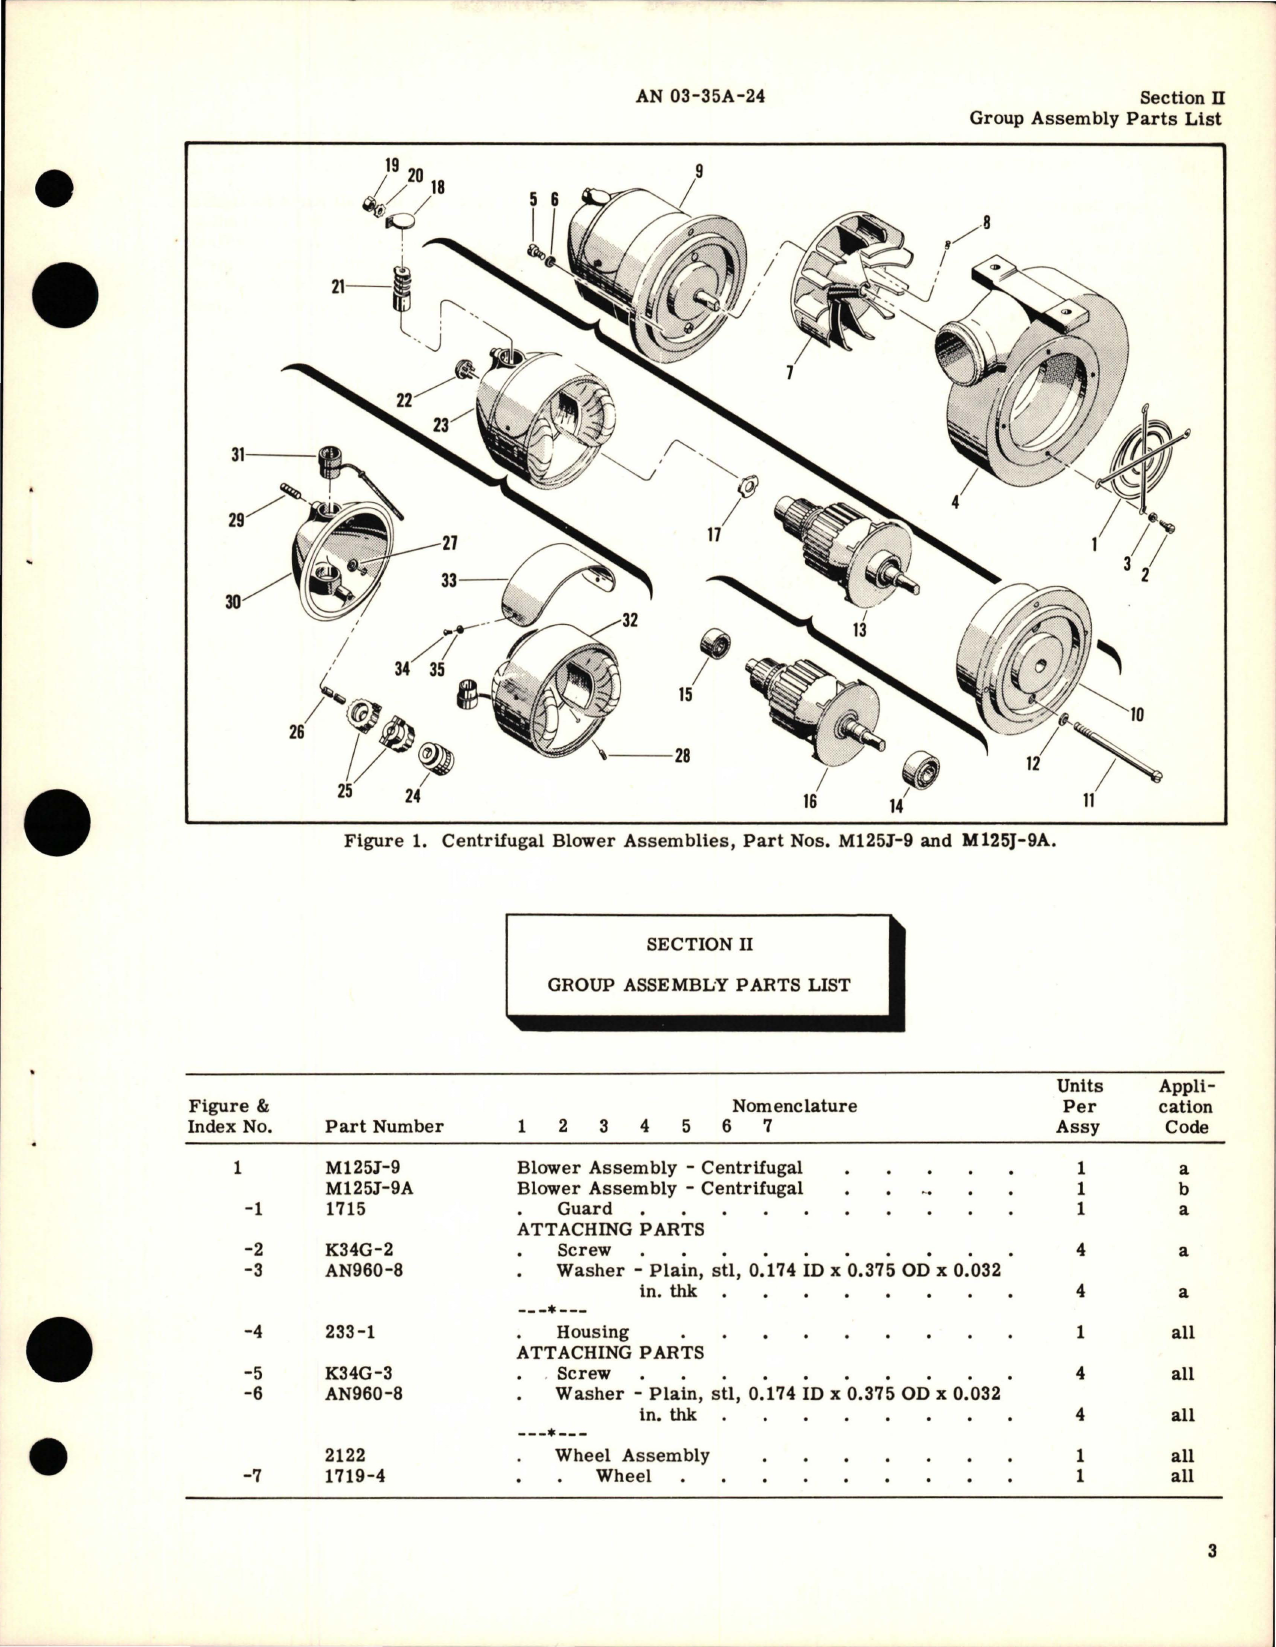 Sample page 5 from AirCorps Library document: Parts Catalog for Blower Assemblies